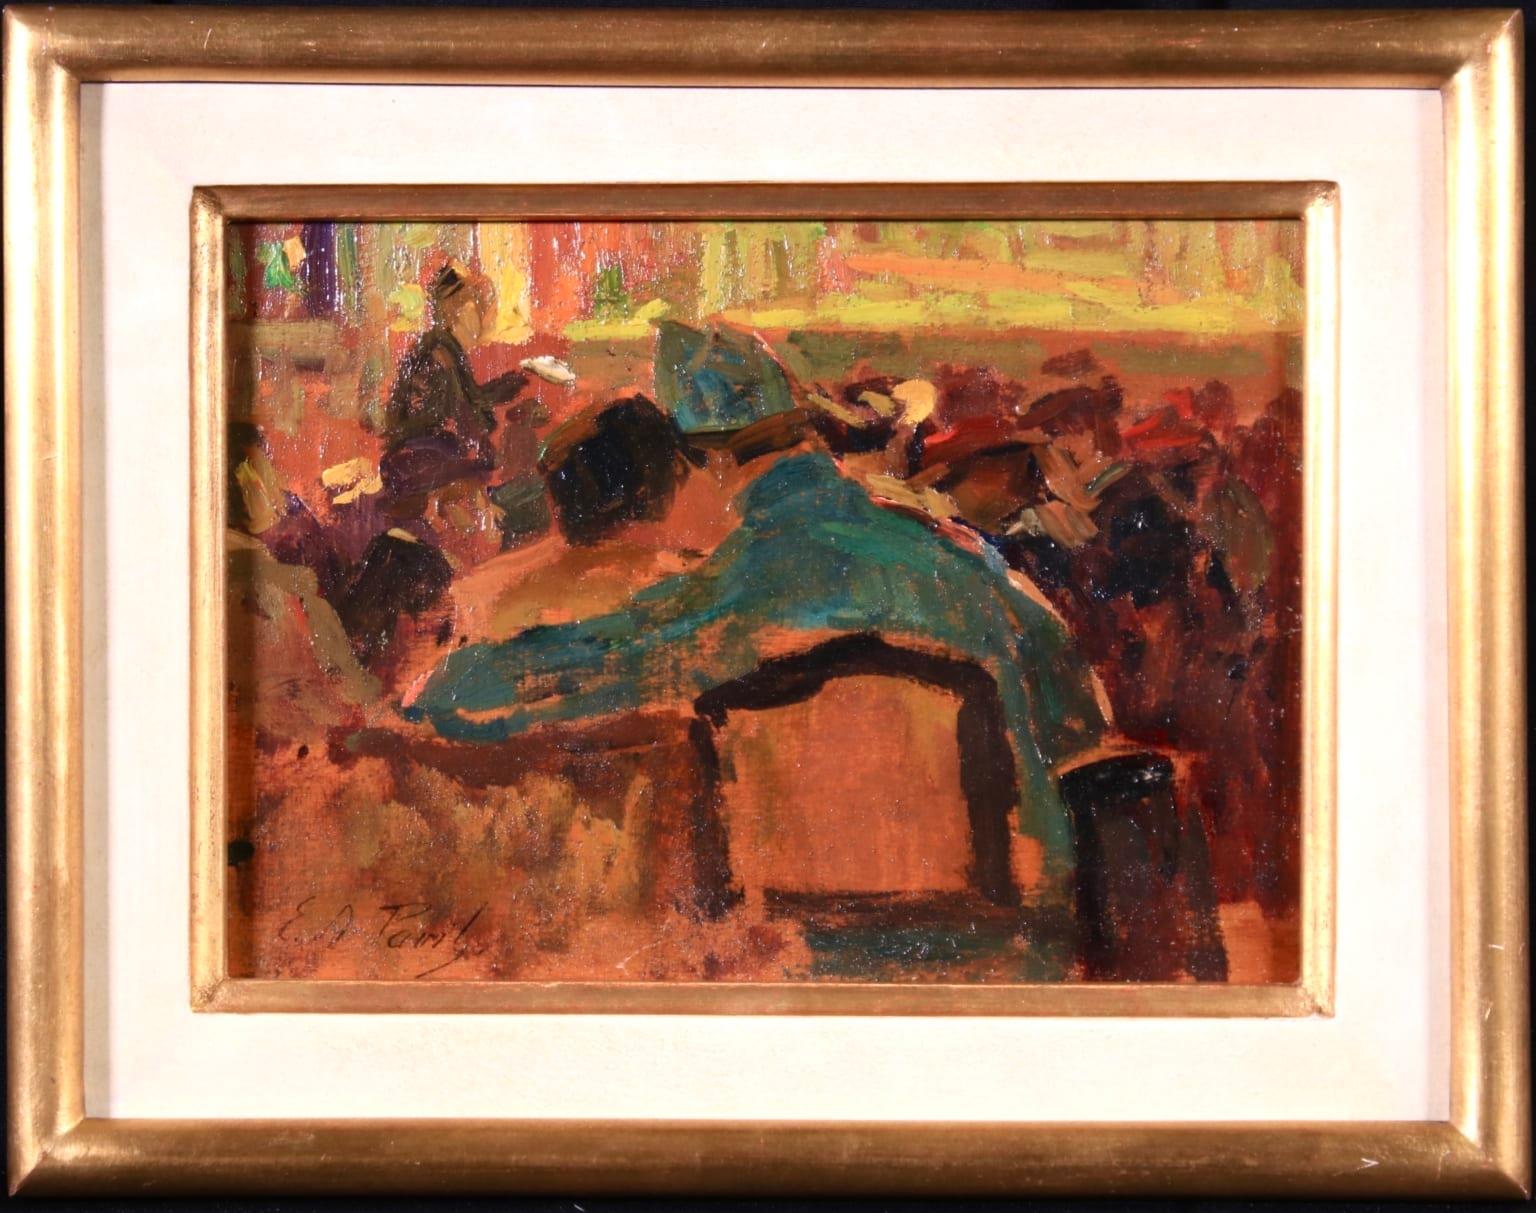 A lovely oil on panel circa 1920 by French post impressionist painter Elie Anatole Pavil figures in a Theatre interior, the couple in the foreground sharing an embrace.

Signature:
Signed lower left

Dimensions:
Framed: 9